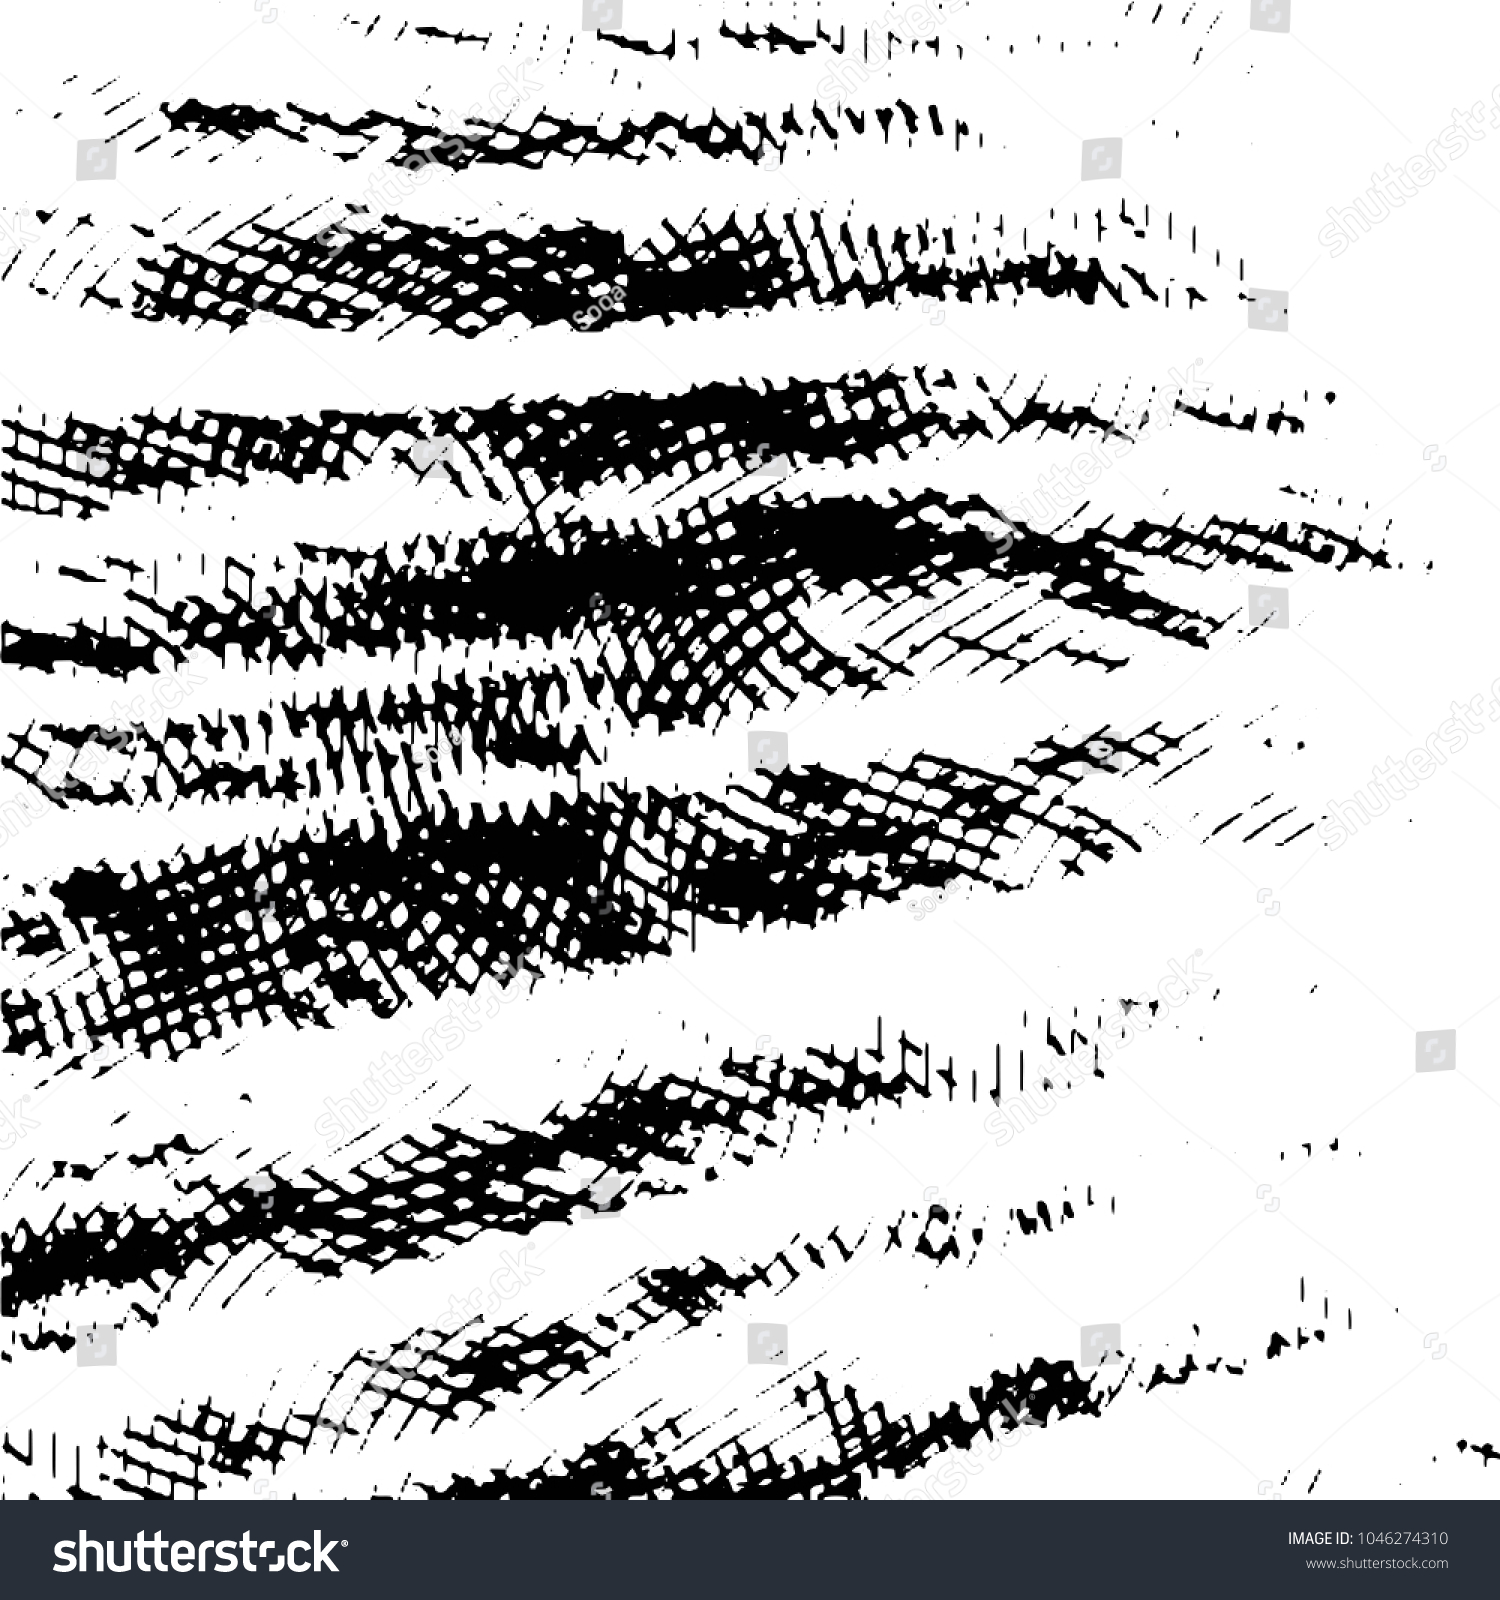 Abstract grunge grid stripe halftone background pattern. Black and white line illustration
 #1046274310